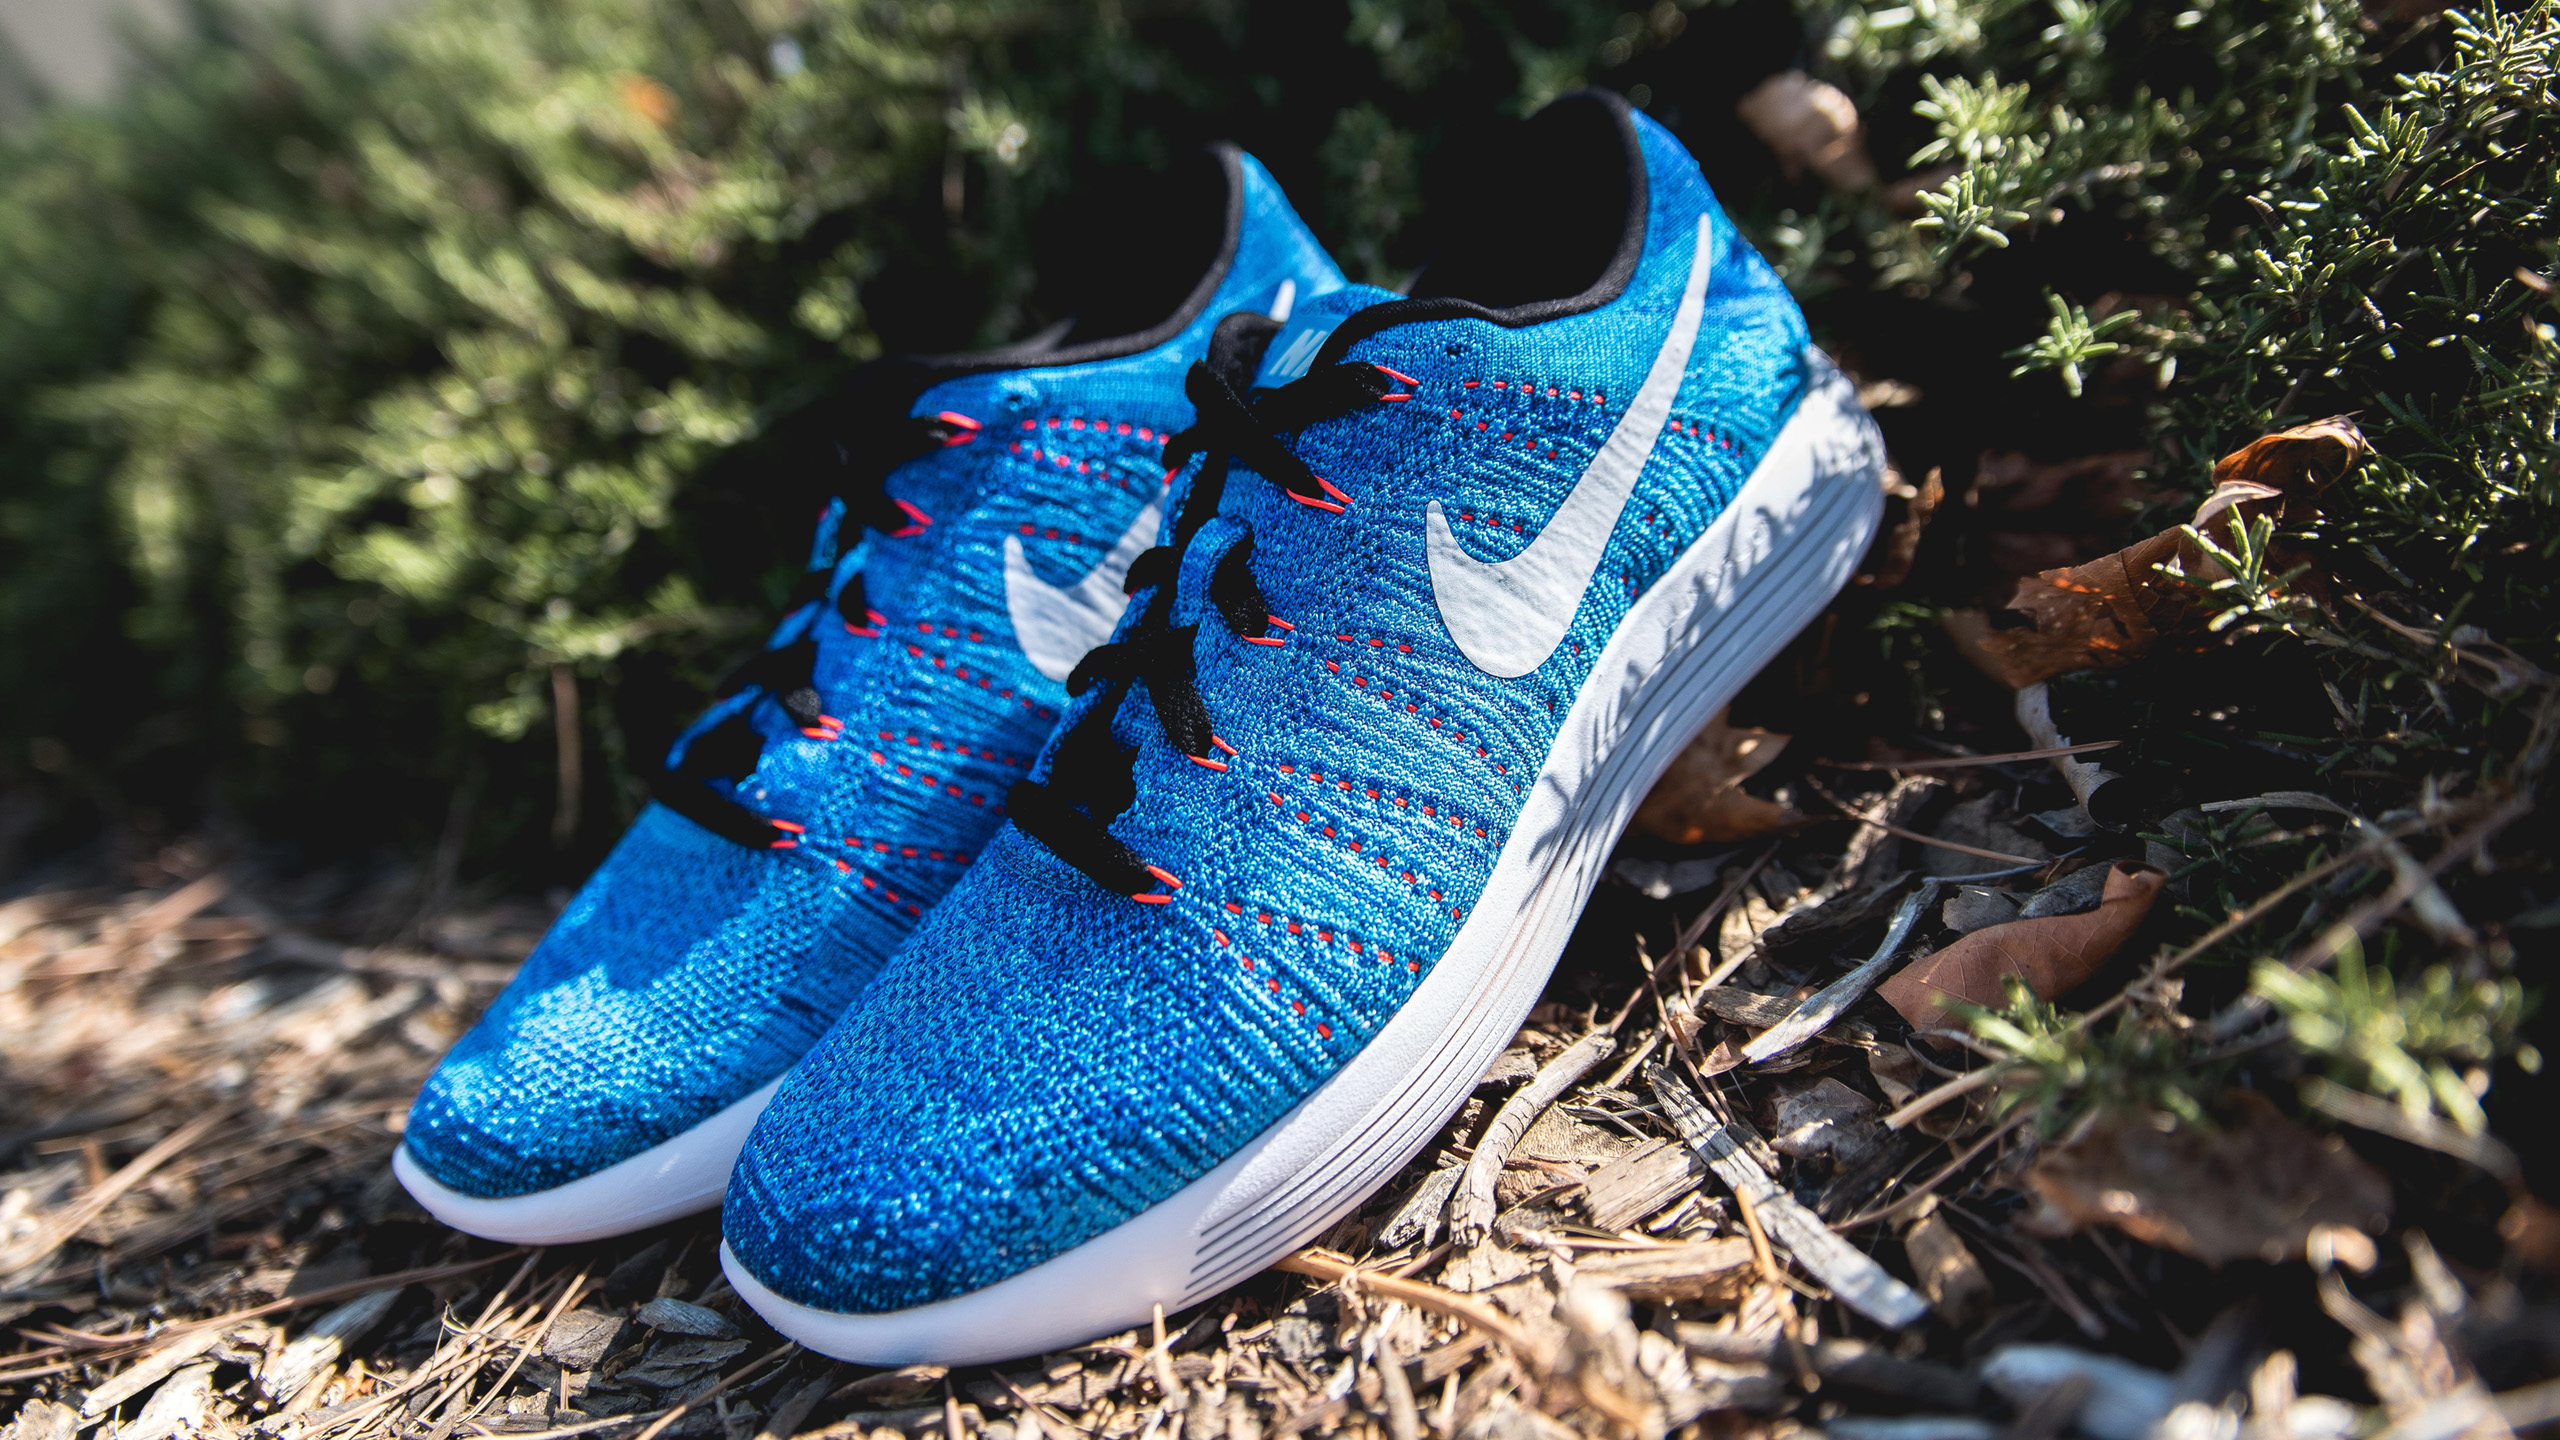 Nike Shoes Wallpaper with Lunarepic Low Flyknit 2 in Blue - HD ...